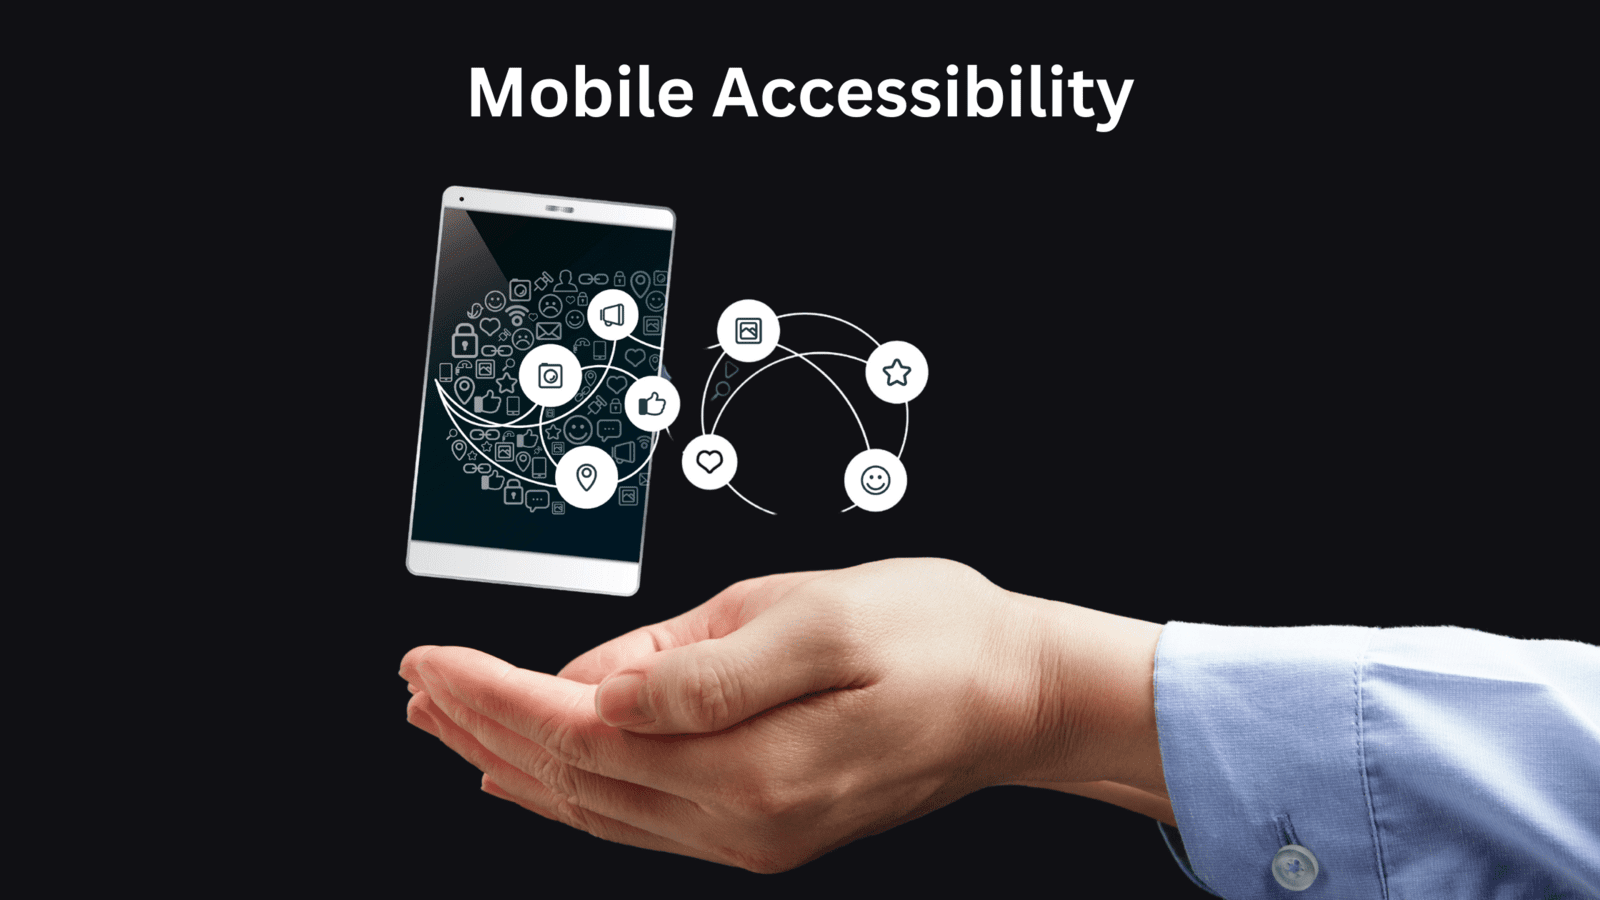 Mobile Accessibility